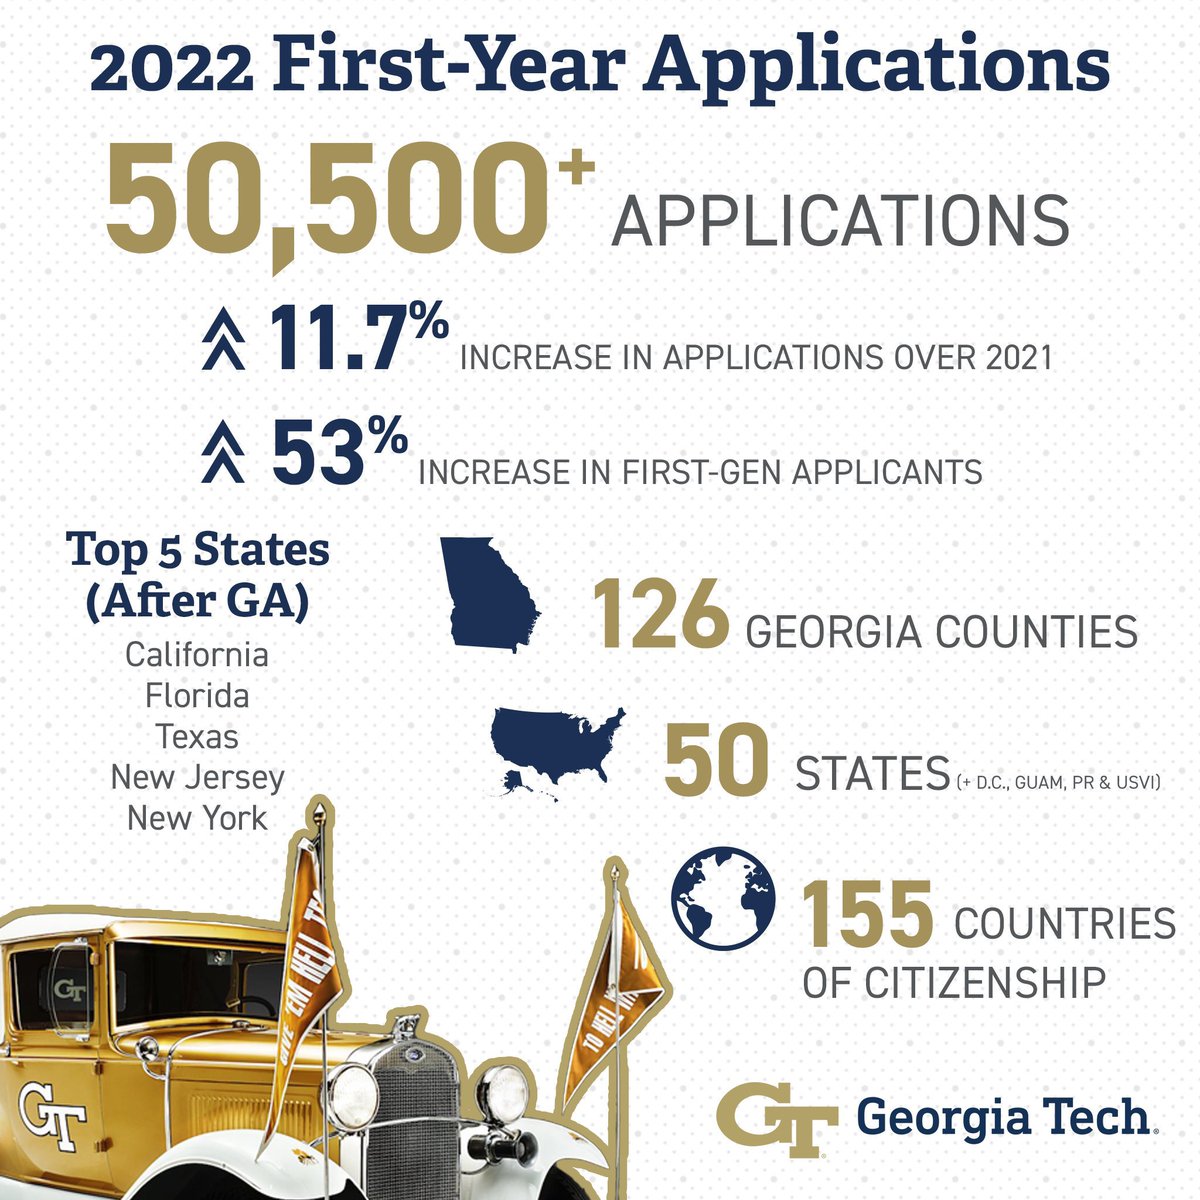 Georgia Tech has received more than 50,500 first-year applications, with a 53% percent increase in first-gen applicants! Thank you to @gtadmission for all of your work and collaborating with us. We look forward to supporting admitted first-gen students! #expandaccess #gt26